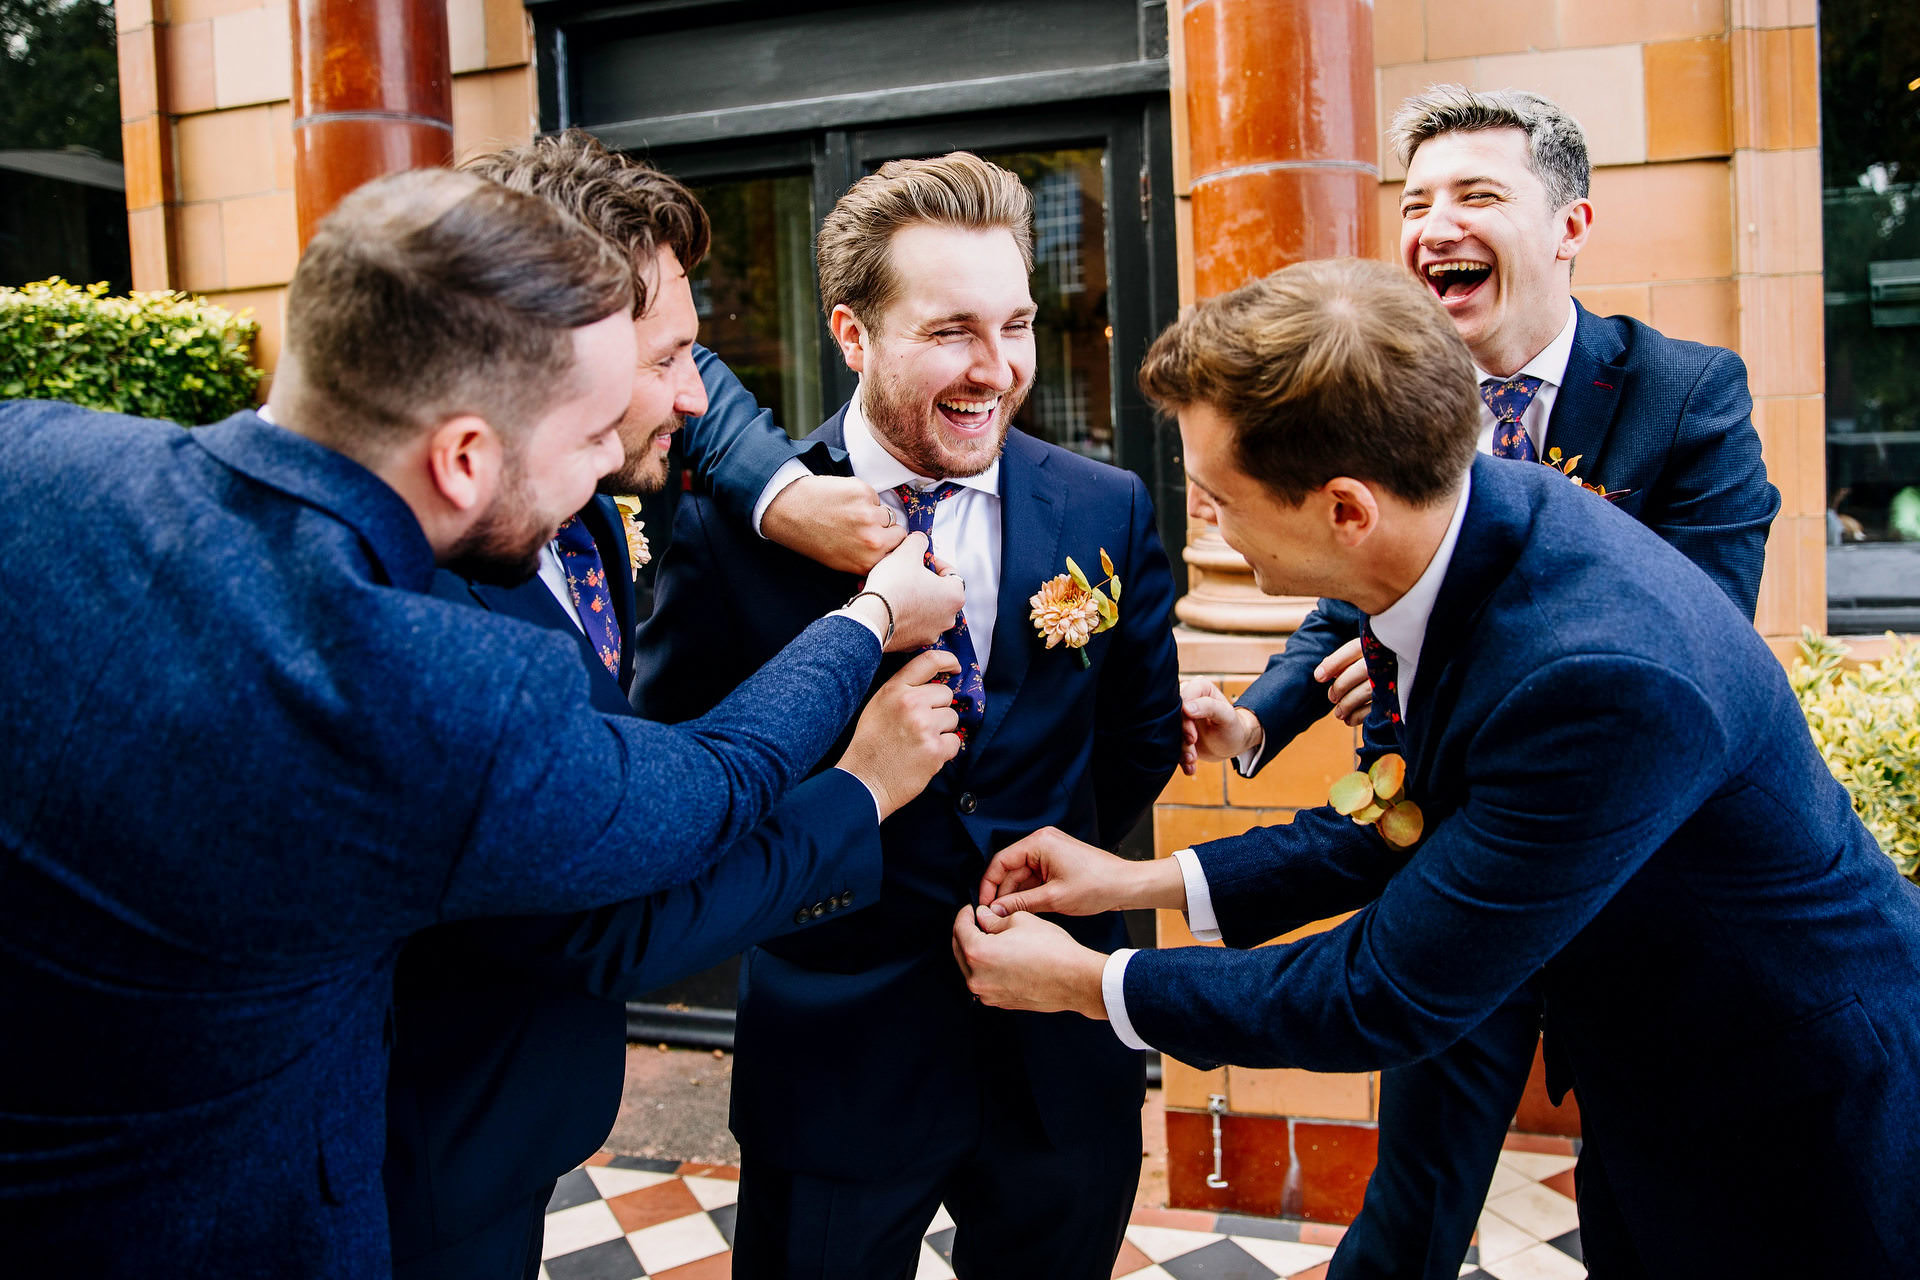 Groups_Lucy Judson Photography, Oxford wedding photographer